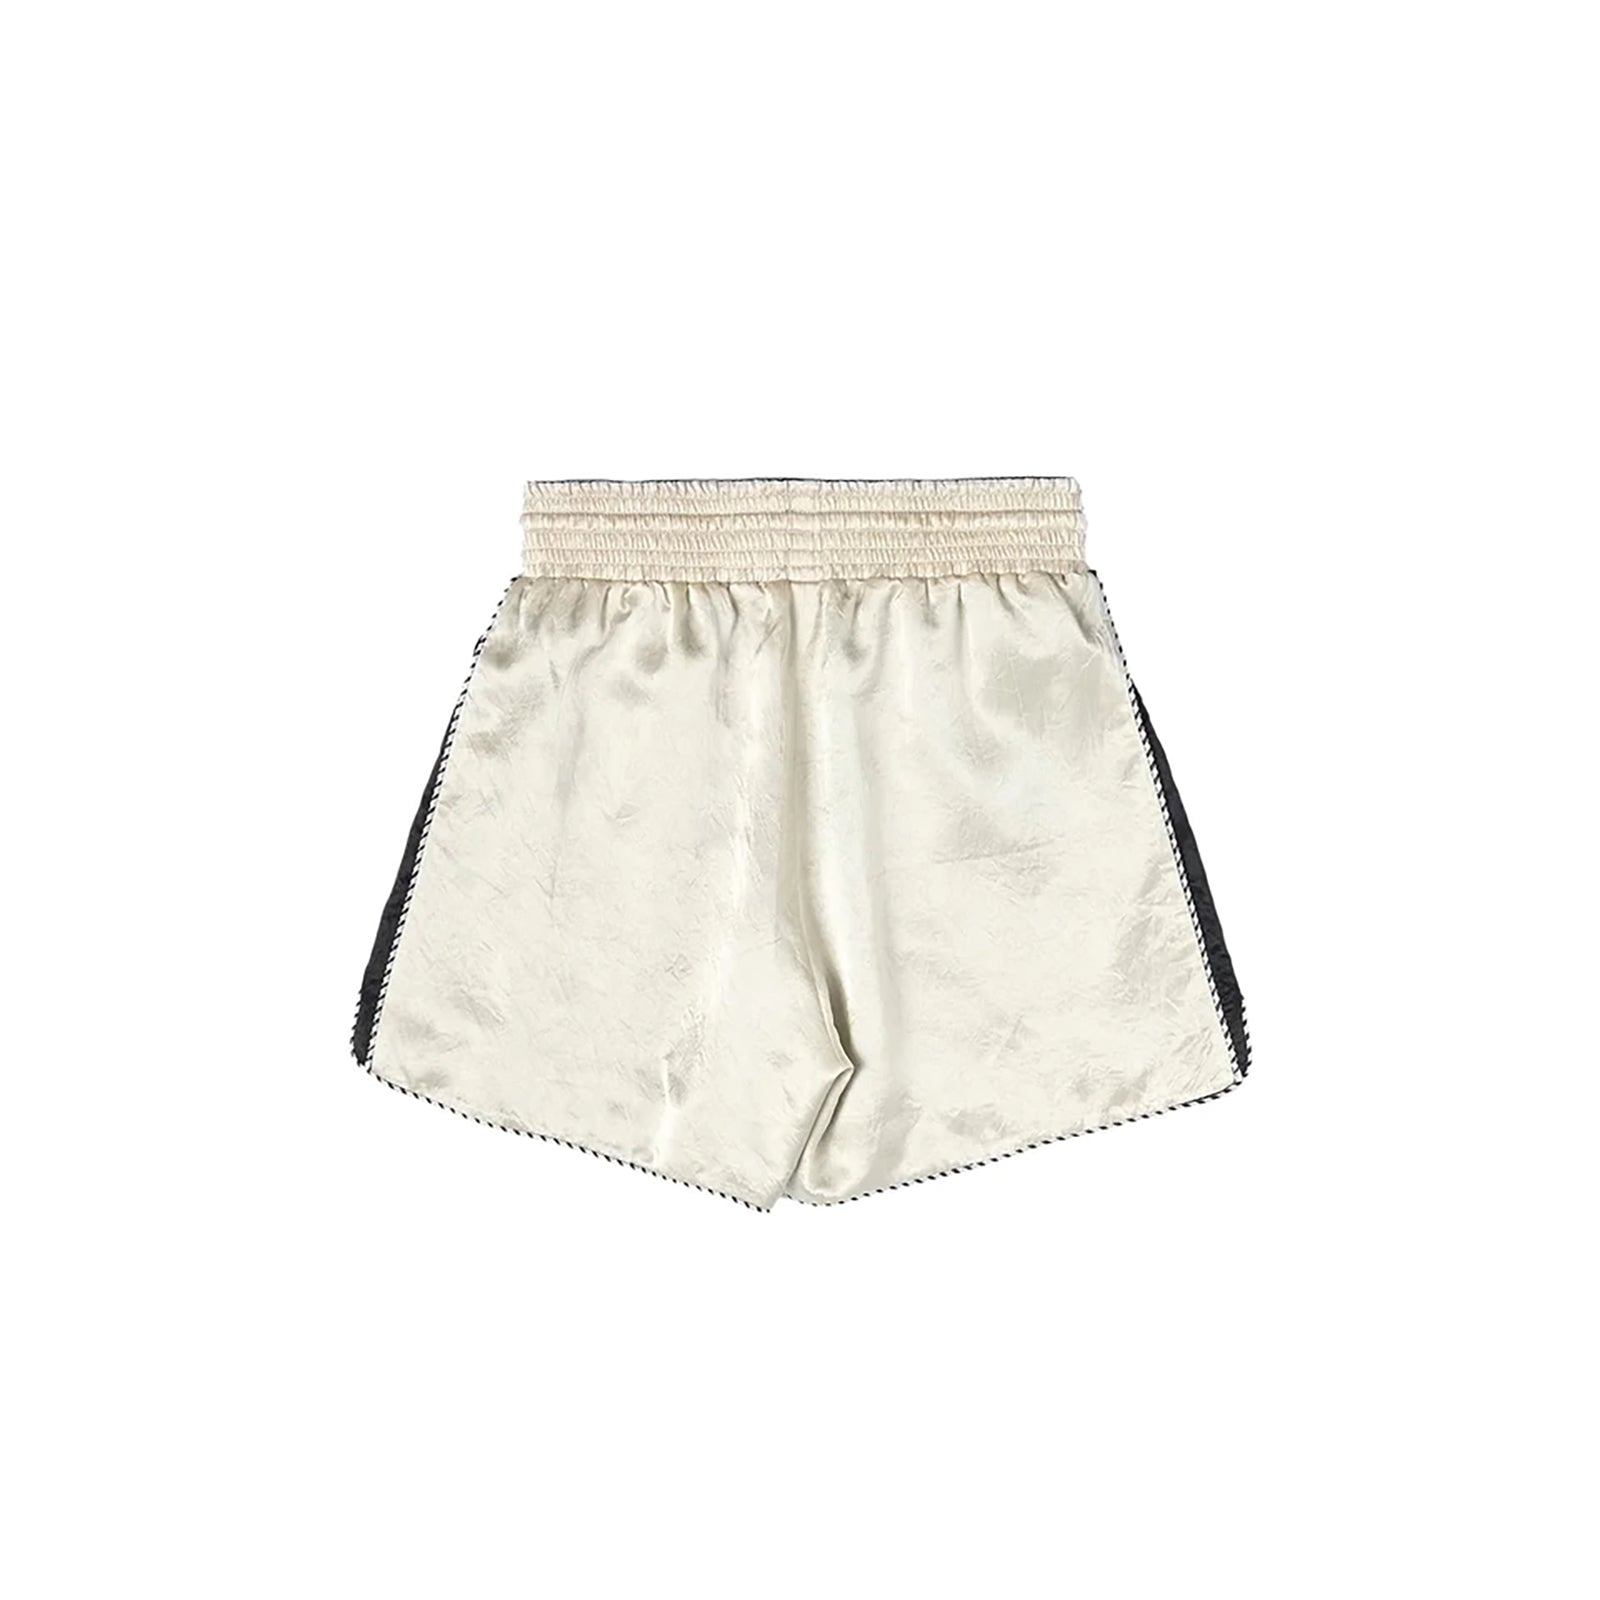 xVESSEL Embroidered Shorts